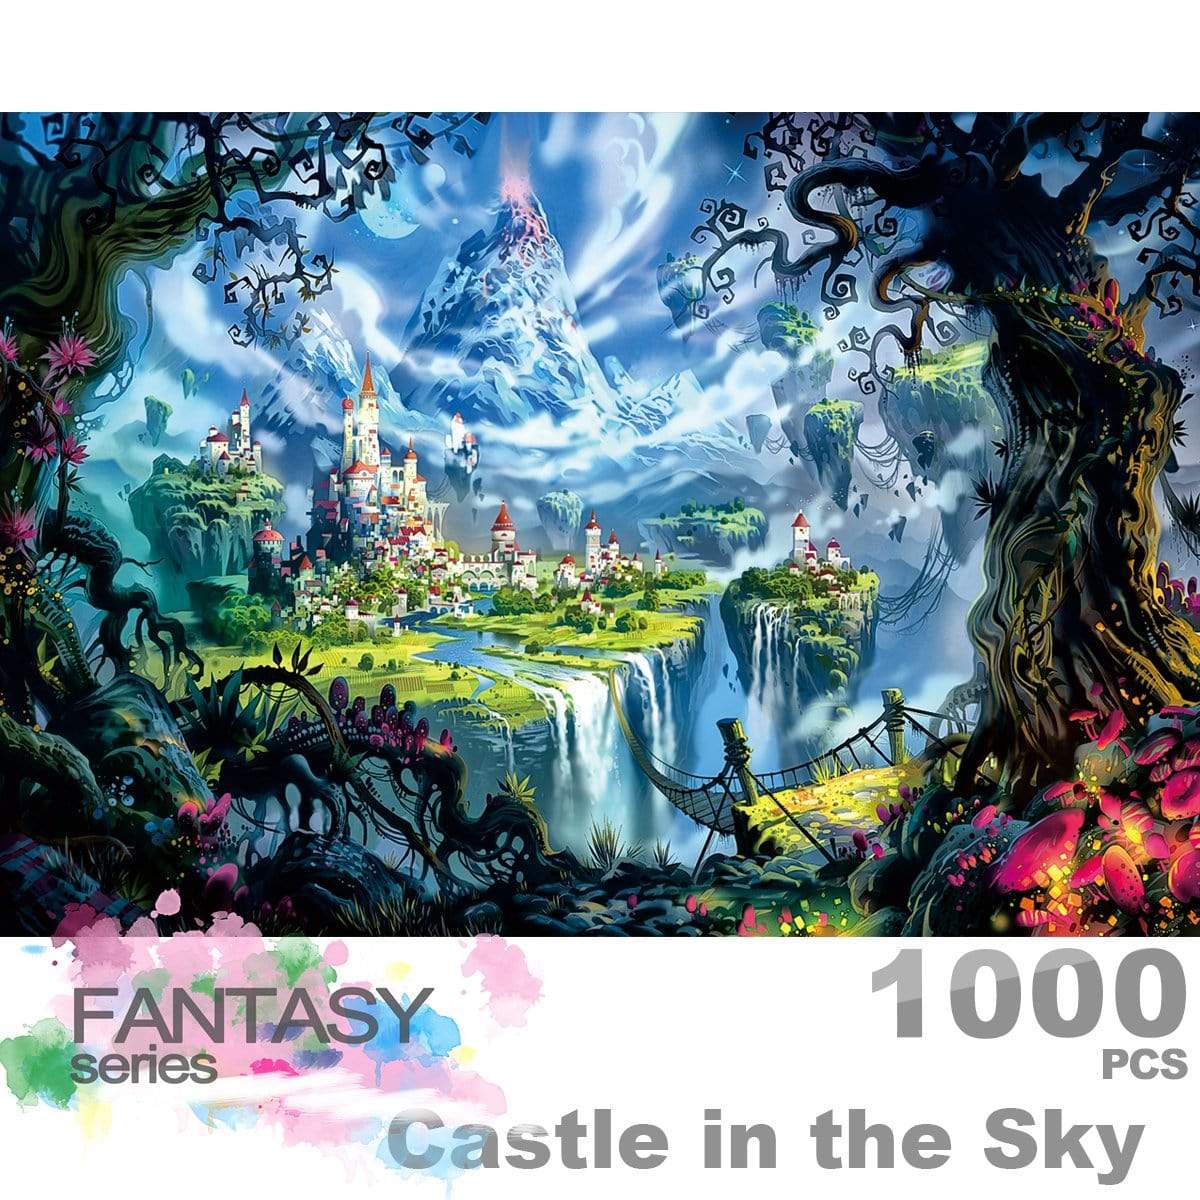 Clementoni One Piece Anime puzzle 1000 pieces finished - one piece missing  : r/Jigsawpuzzles